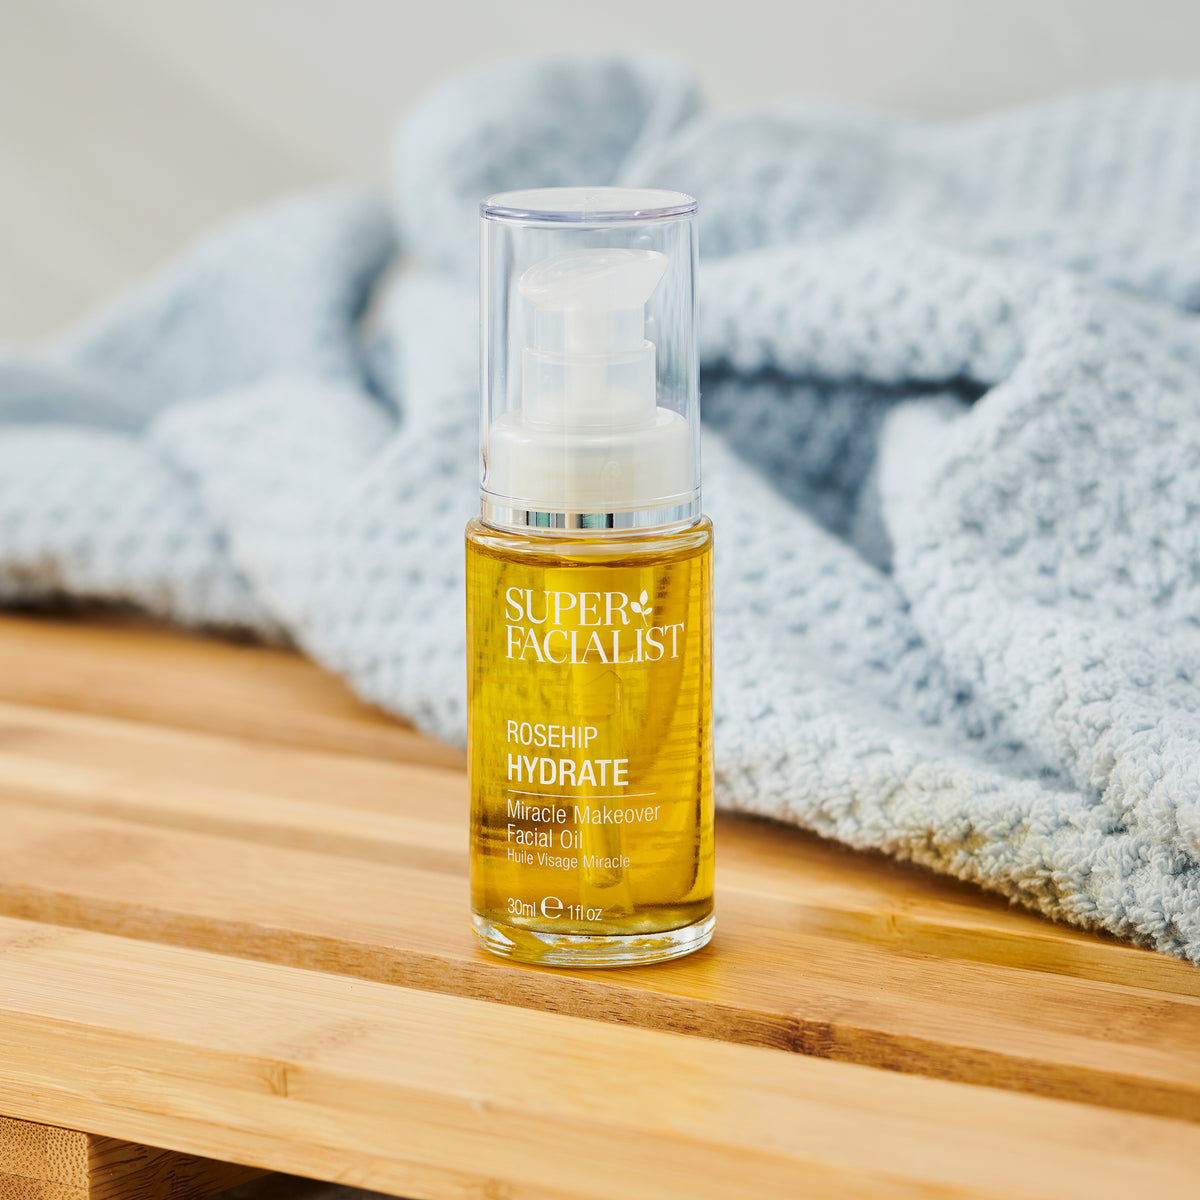 Rosehip Hydrate Miracle Makeover Facial Oil